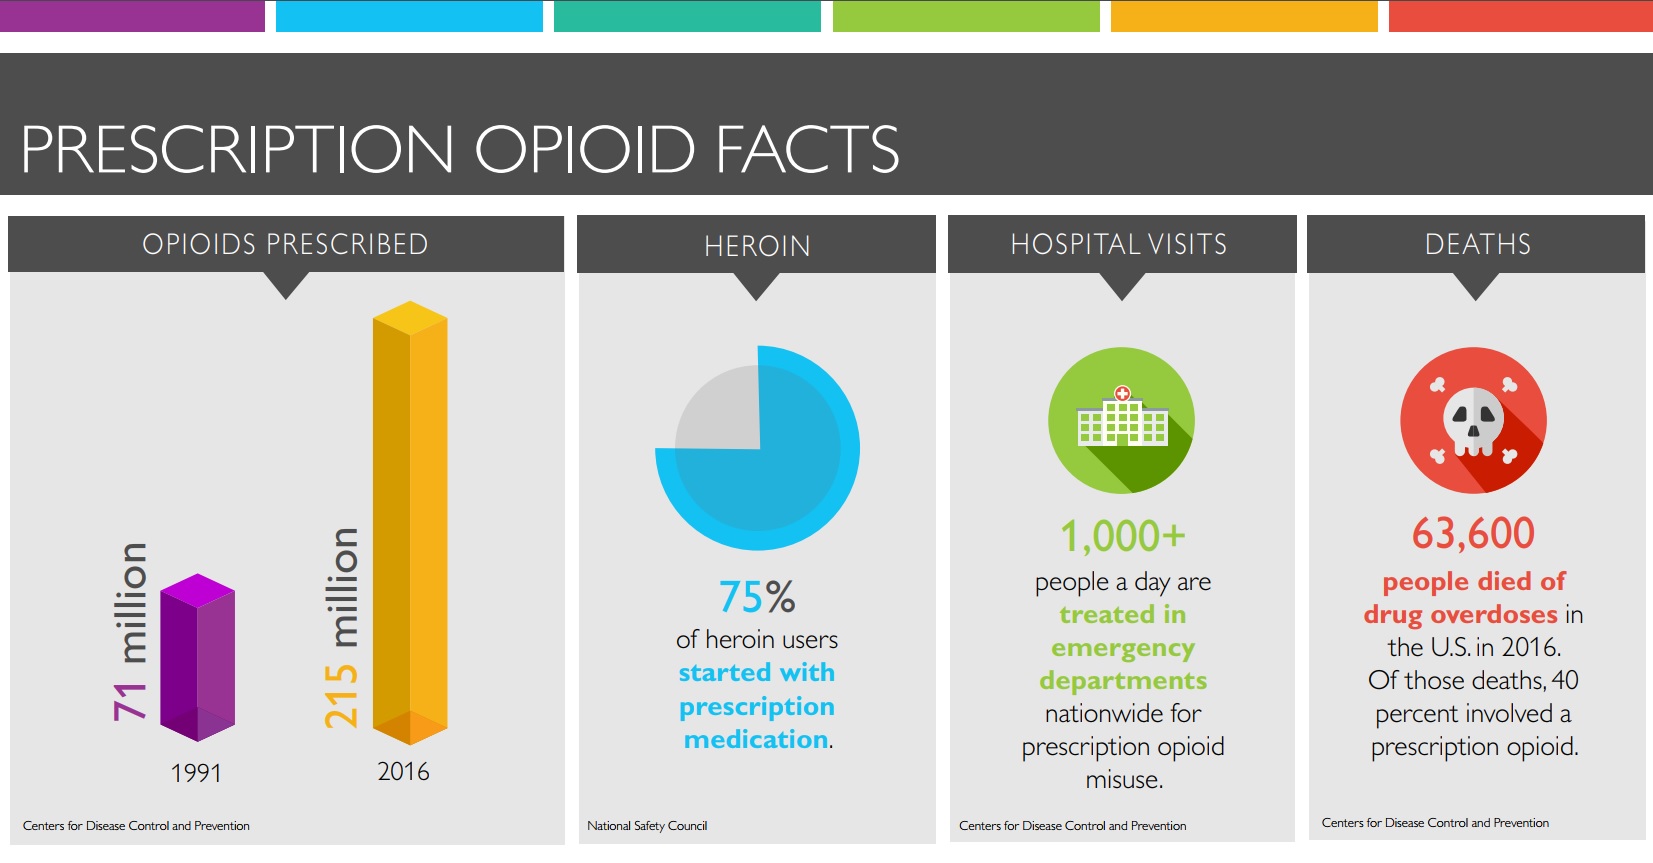 Infographic includes charts that illustrate the increase in opioids prescribed between 1991 (7 million) and 2013 (207 million); the percentage of patients who transition from prescription medication to heroin use (75 percent); the number of people treated in hospital emergency departments nationally every day for not using prescription opioids as intended (1,000-plus); and the number of people who have died from opioid overdoses in the U.S. (165,000). Statistics provided by the National Institute on Drug Abuse